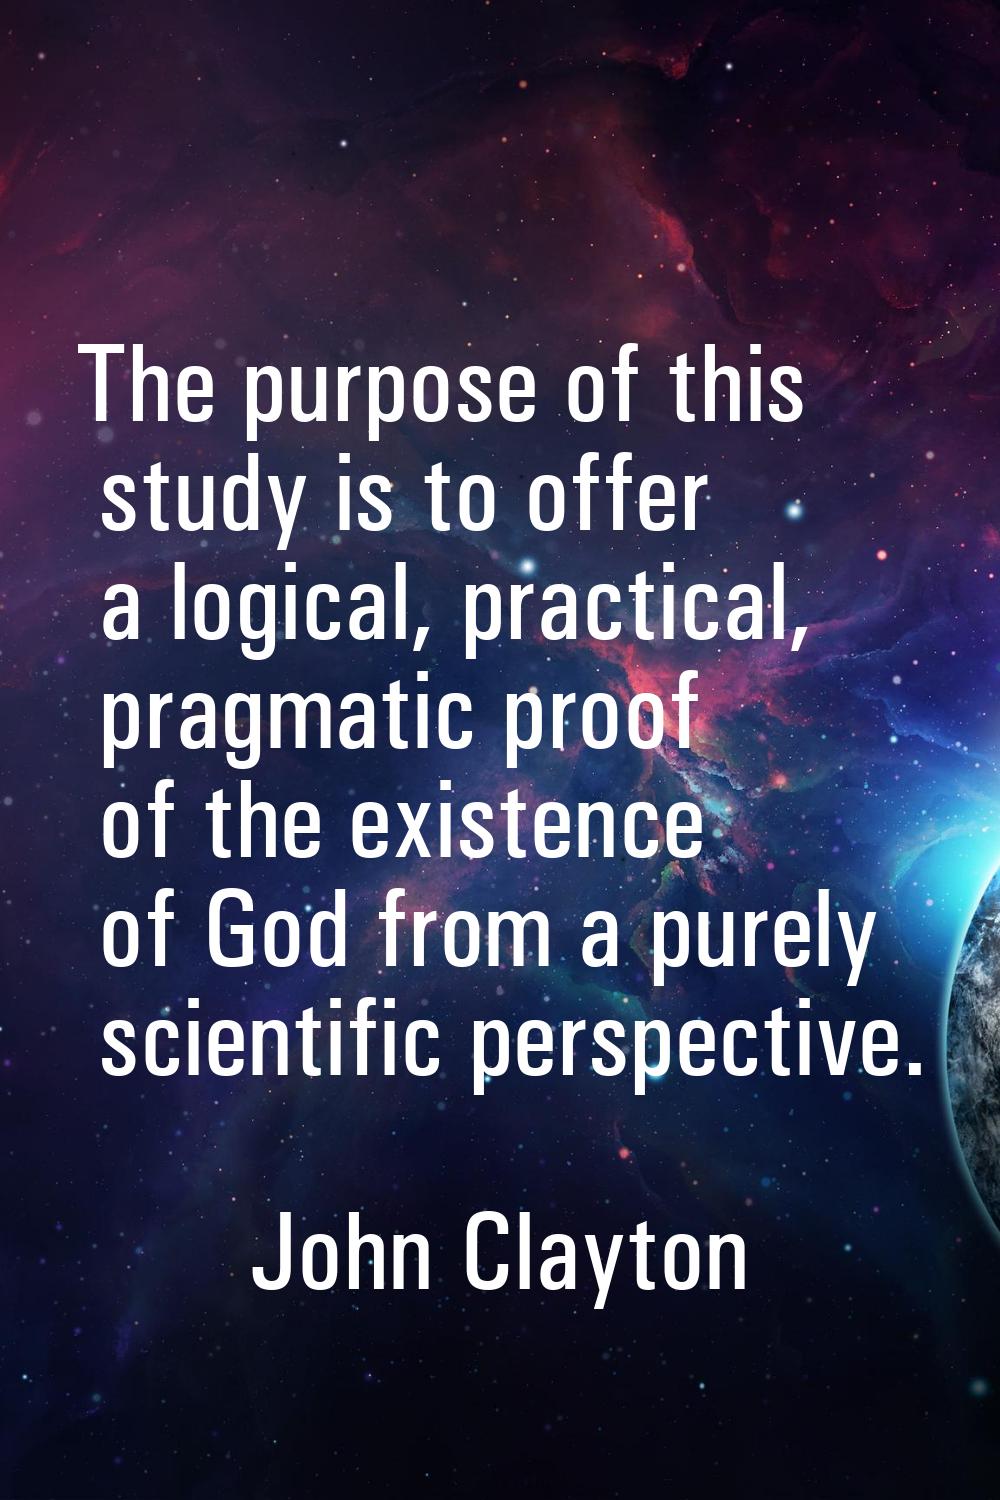 The purpose of this study is to offer a logical, practical, pragmatic proof of the existence of God